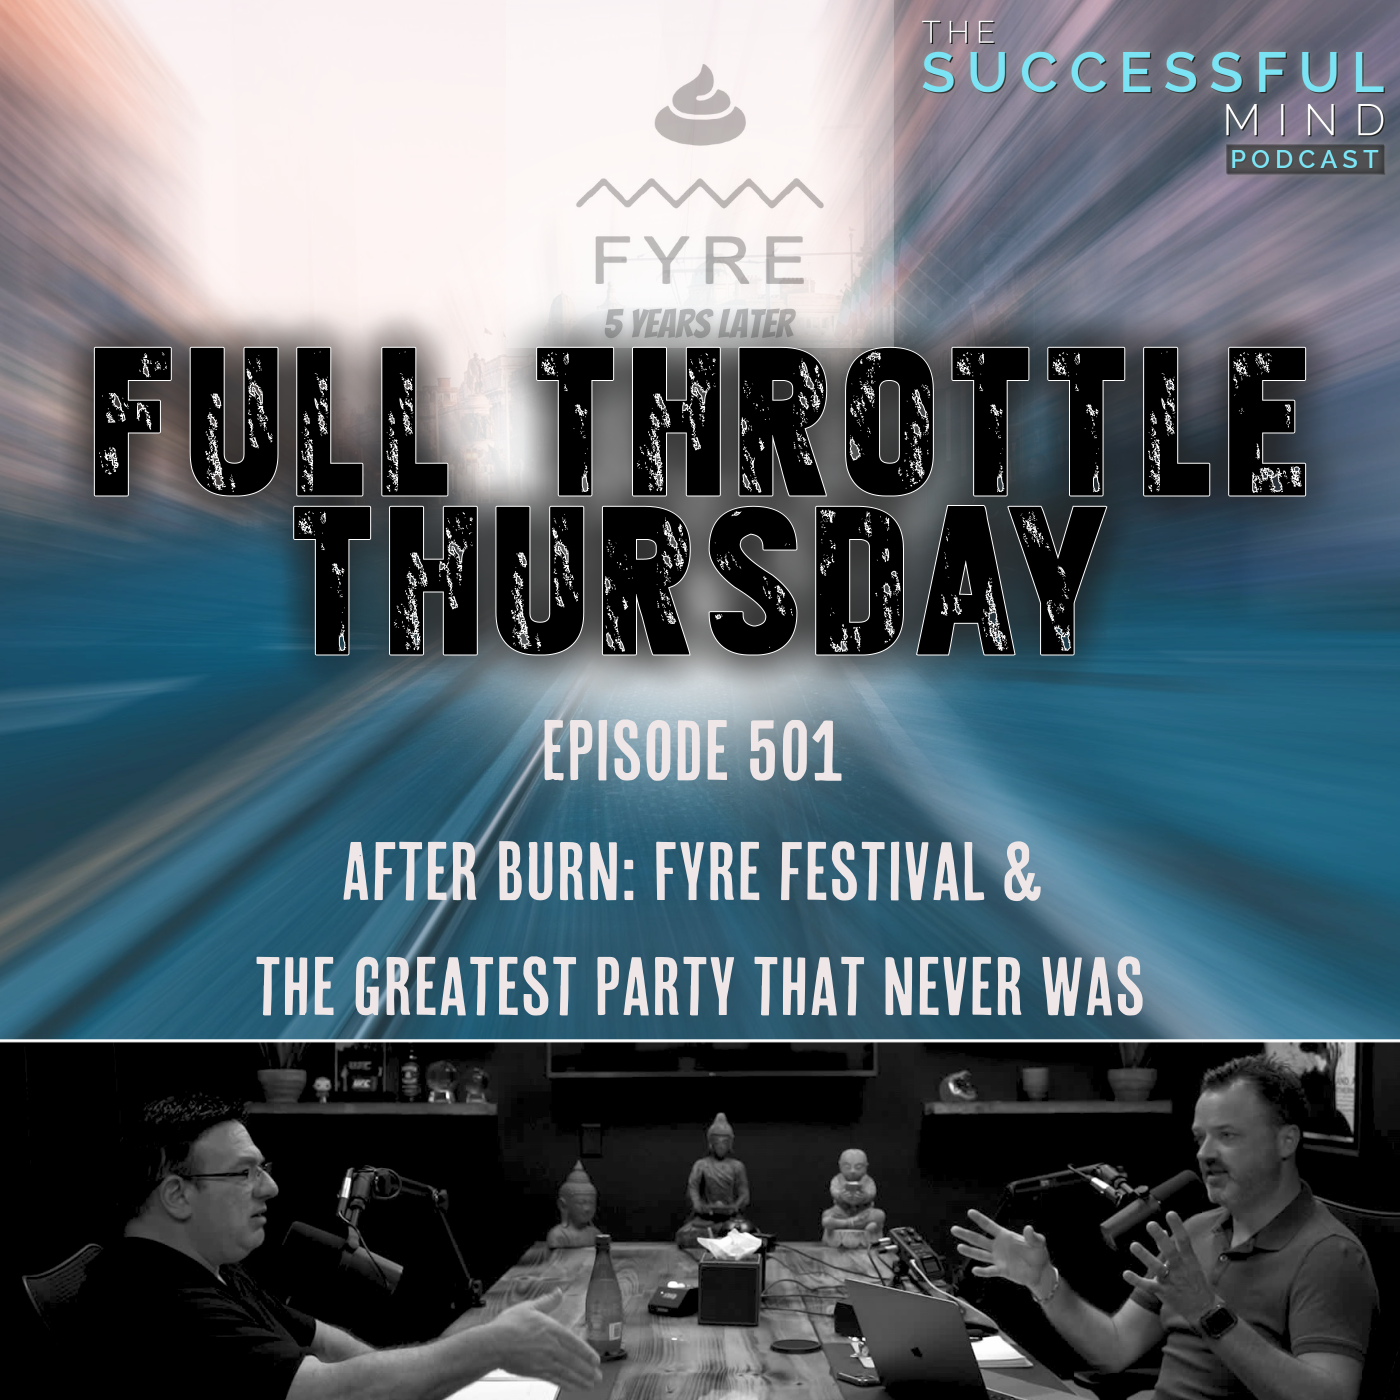 The Successful Mind Podcast - Full Throttle Thursday - After Burn: Fyre Festival & The Greatest Event That Never Was